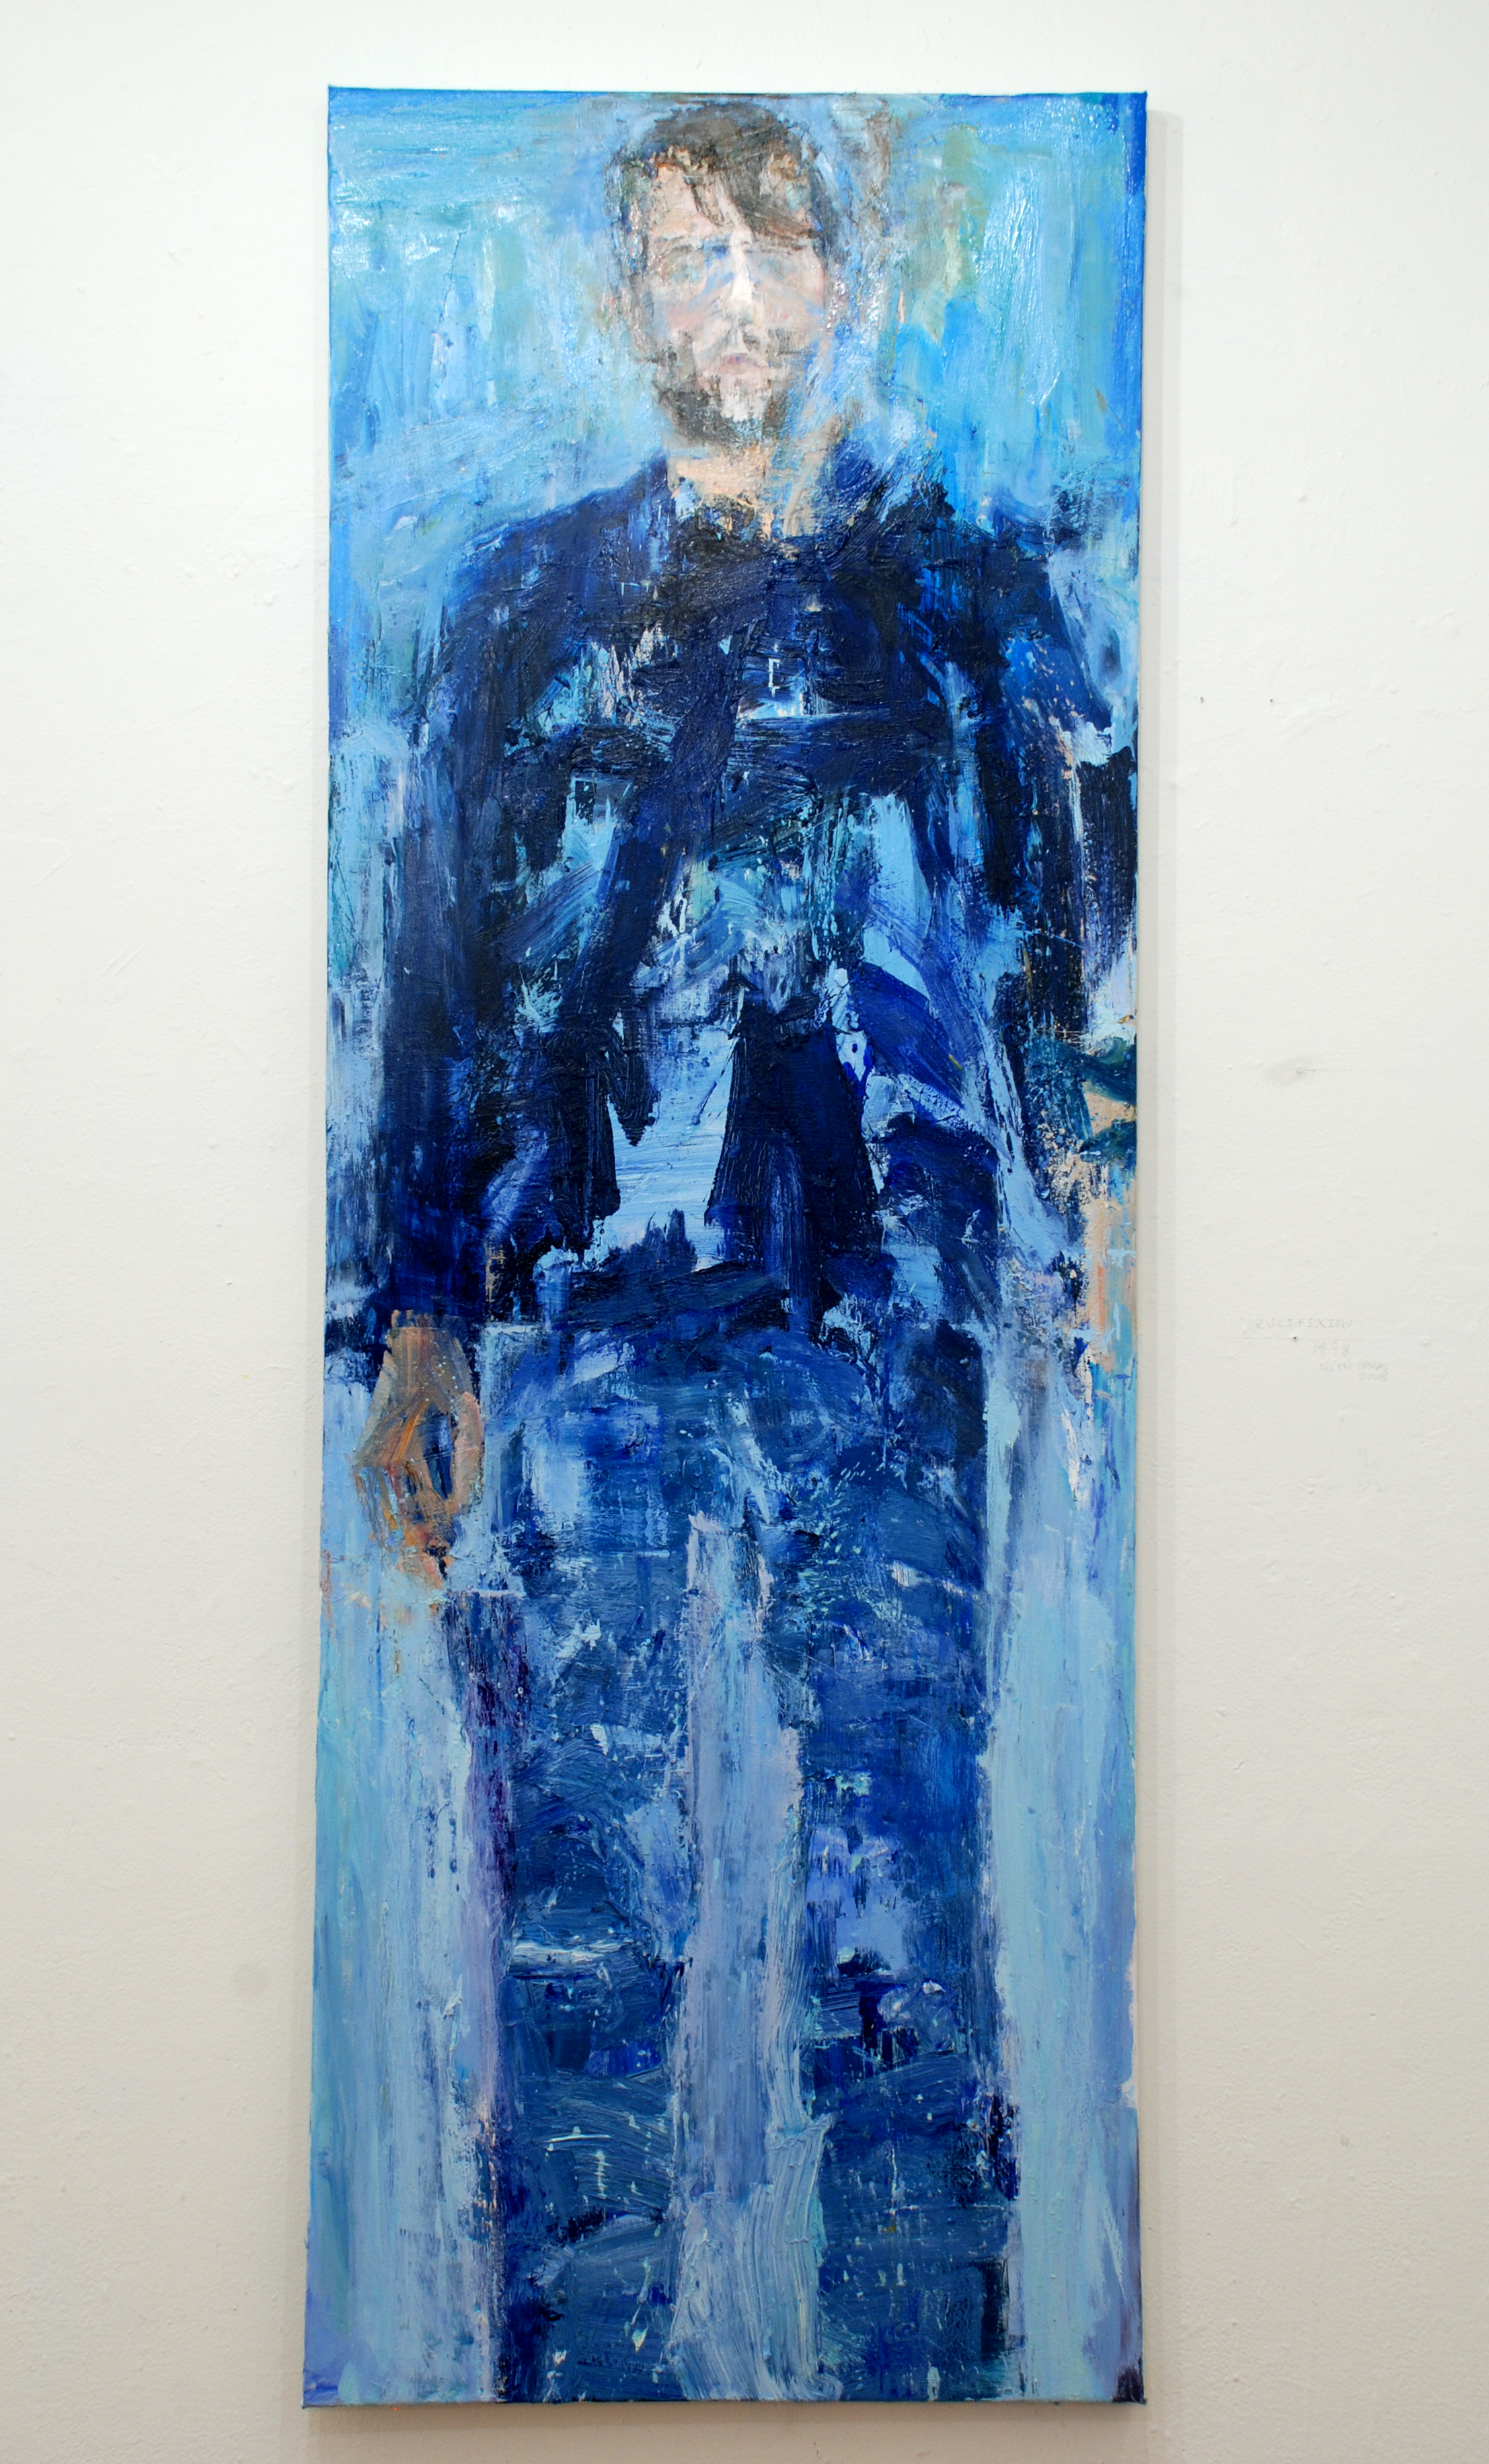  Untitled, oil on canvas, 230x83cm, 2008 